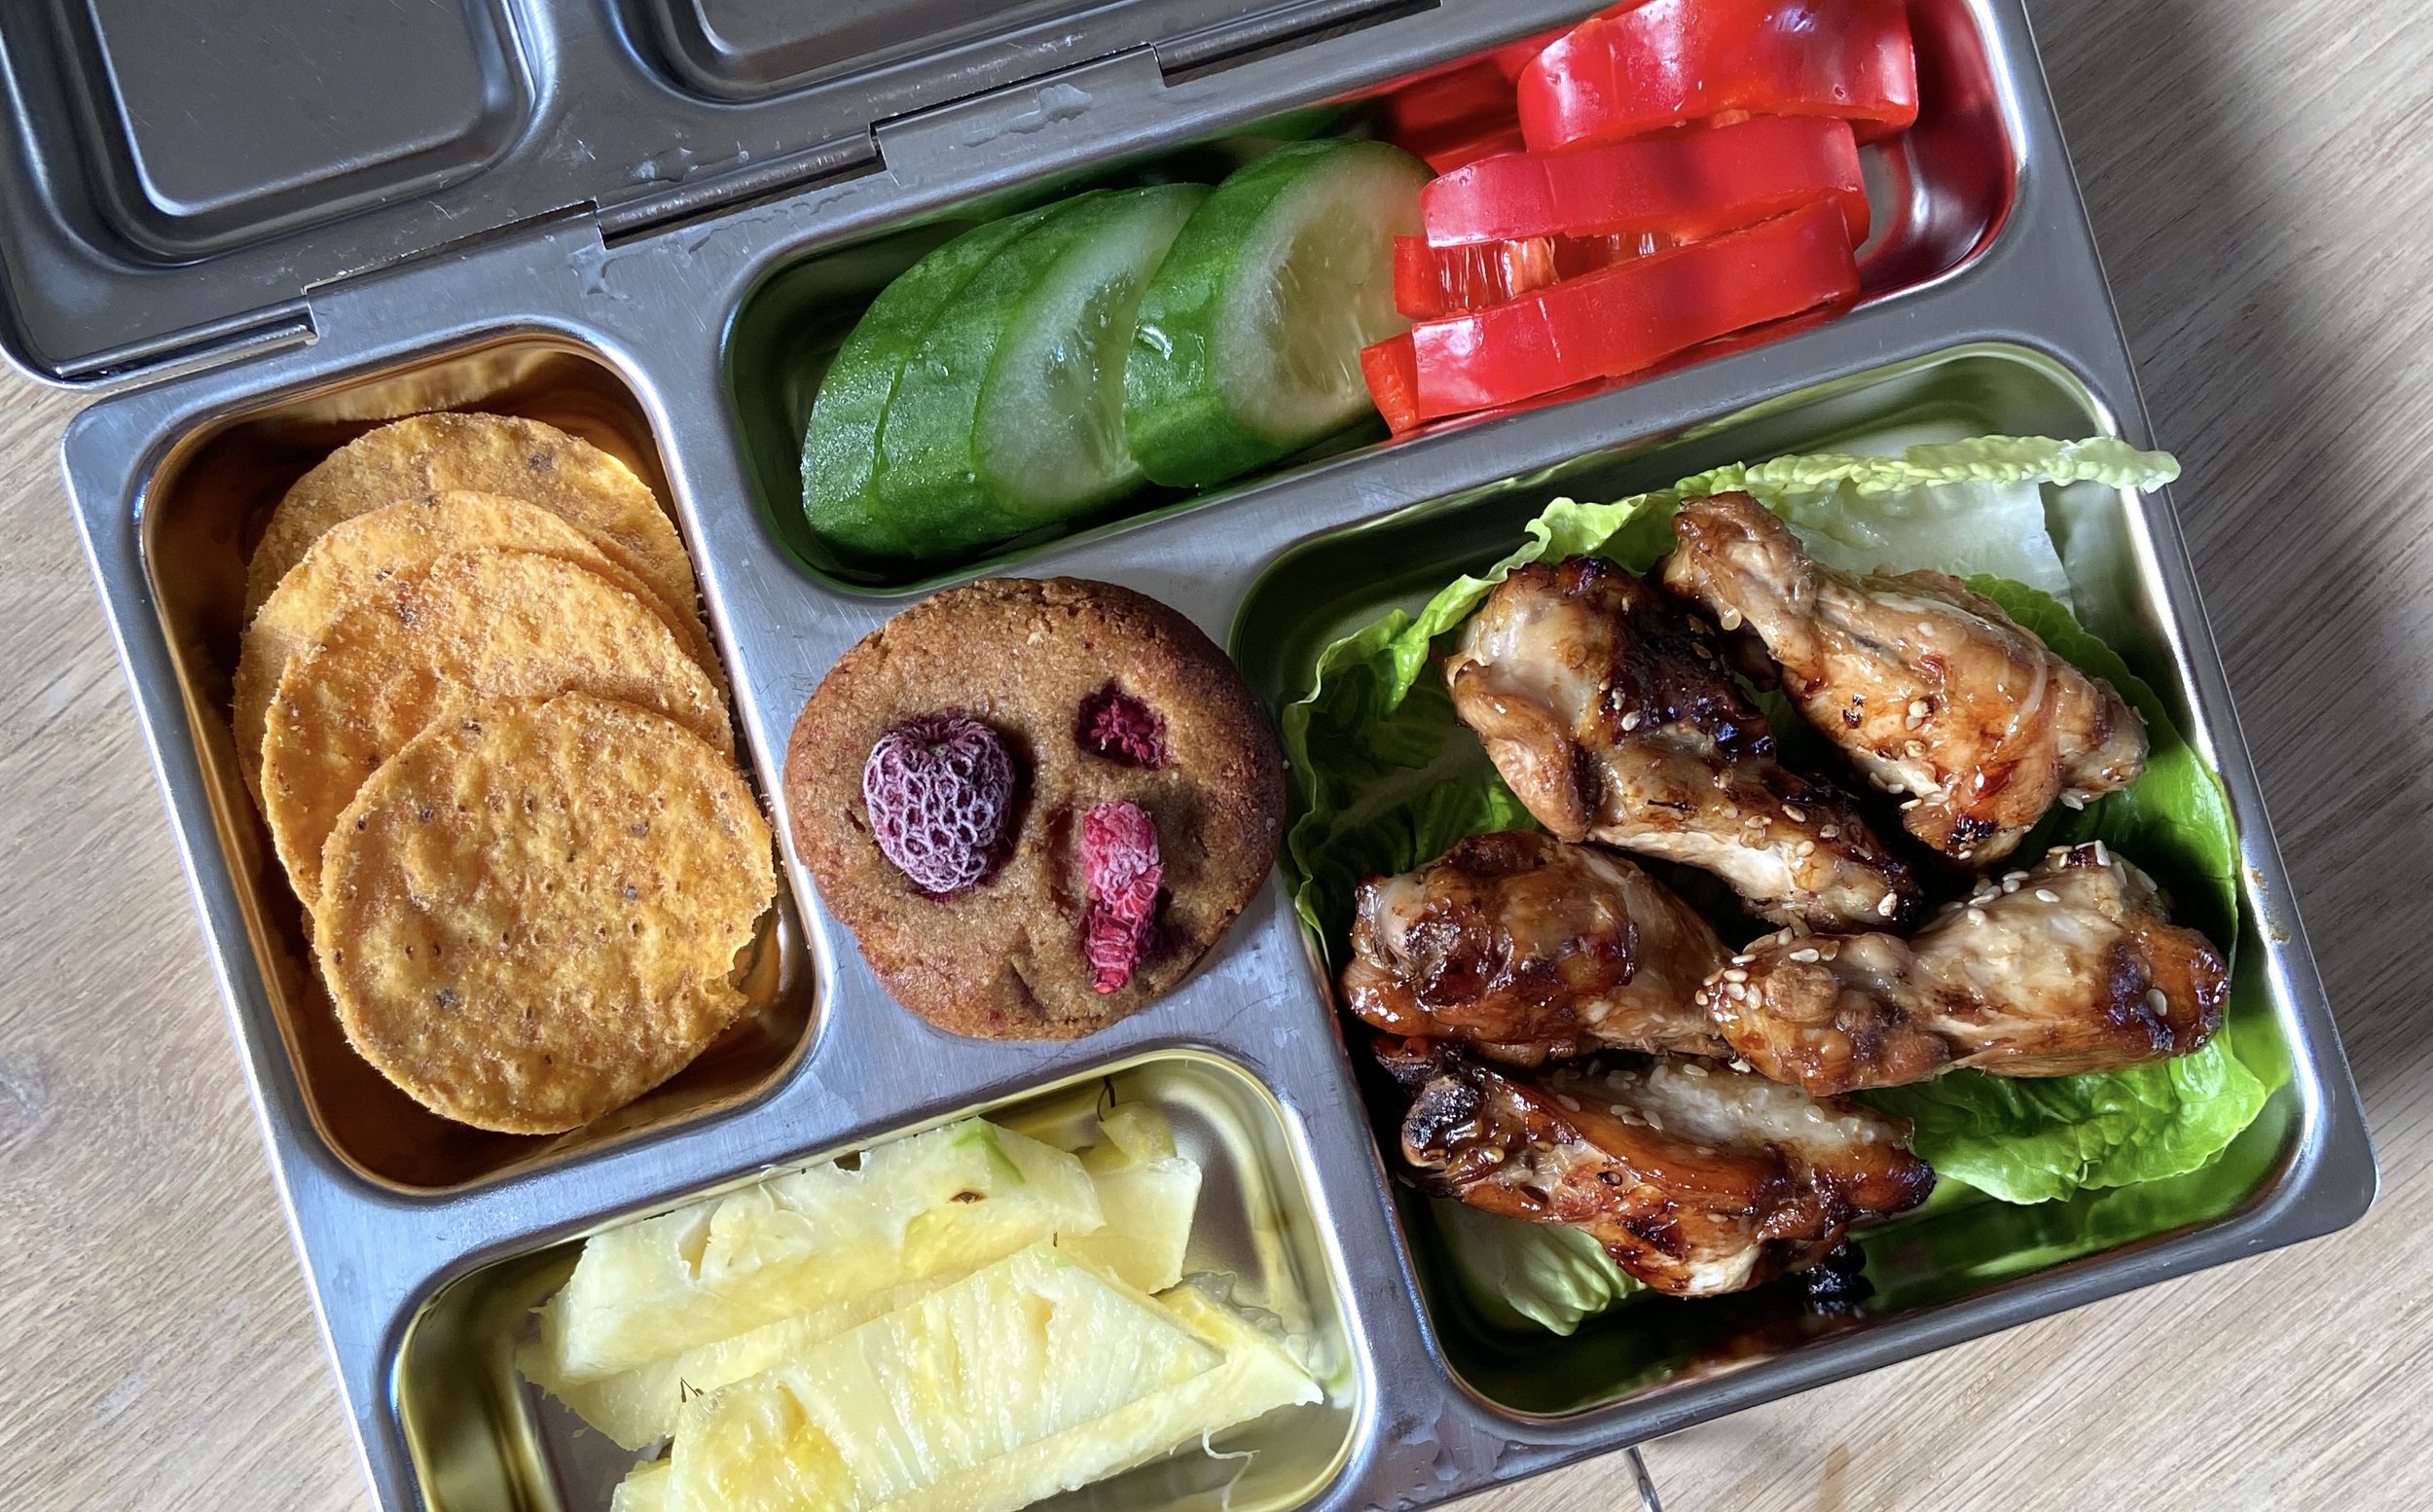 Packing School Lunches: Common Mistakes!